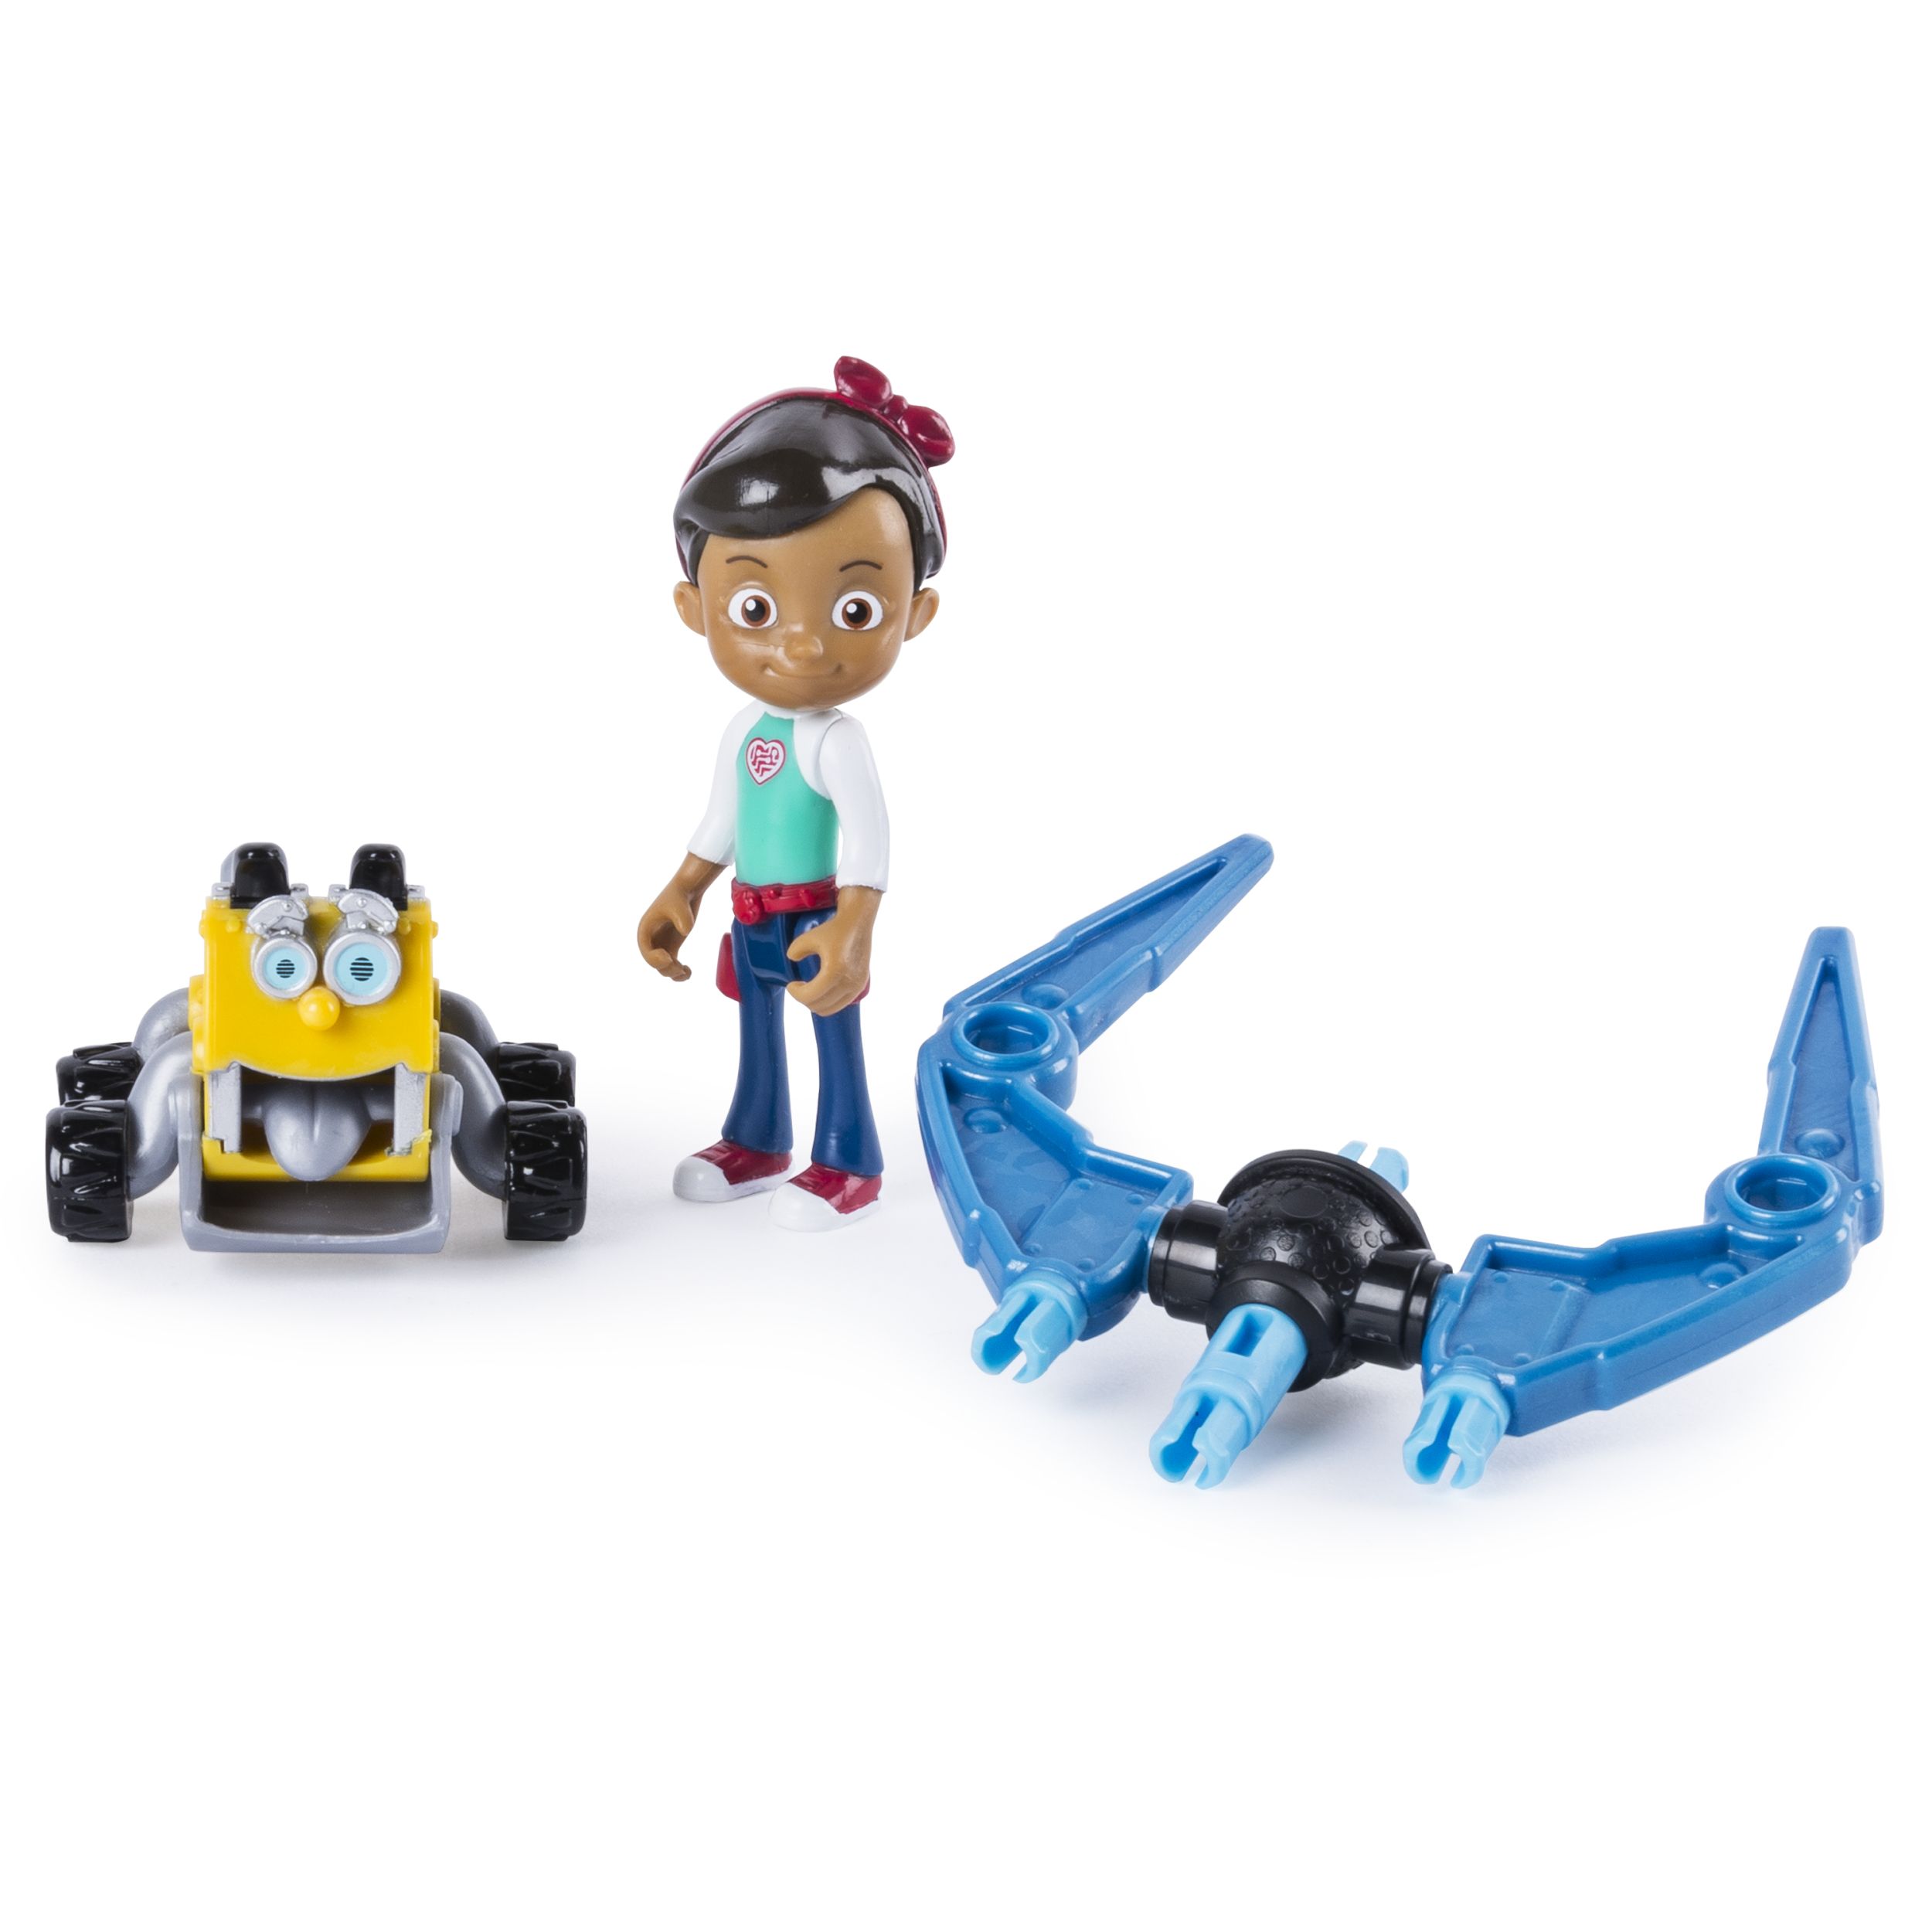 Rusty Rivets and Bytes